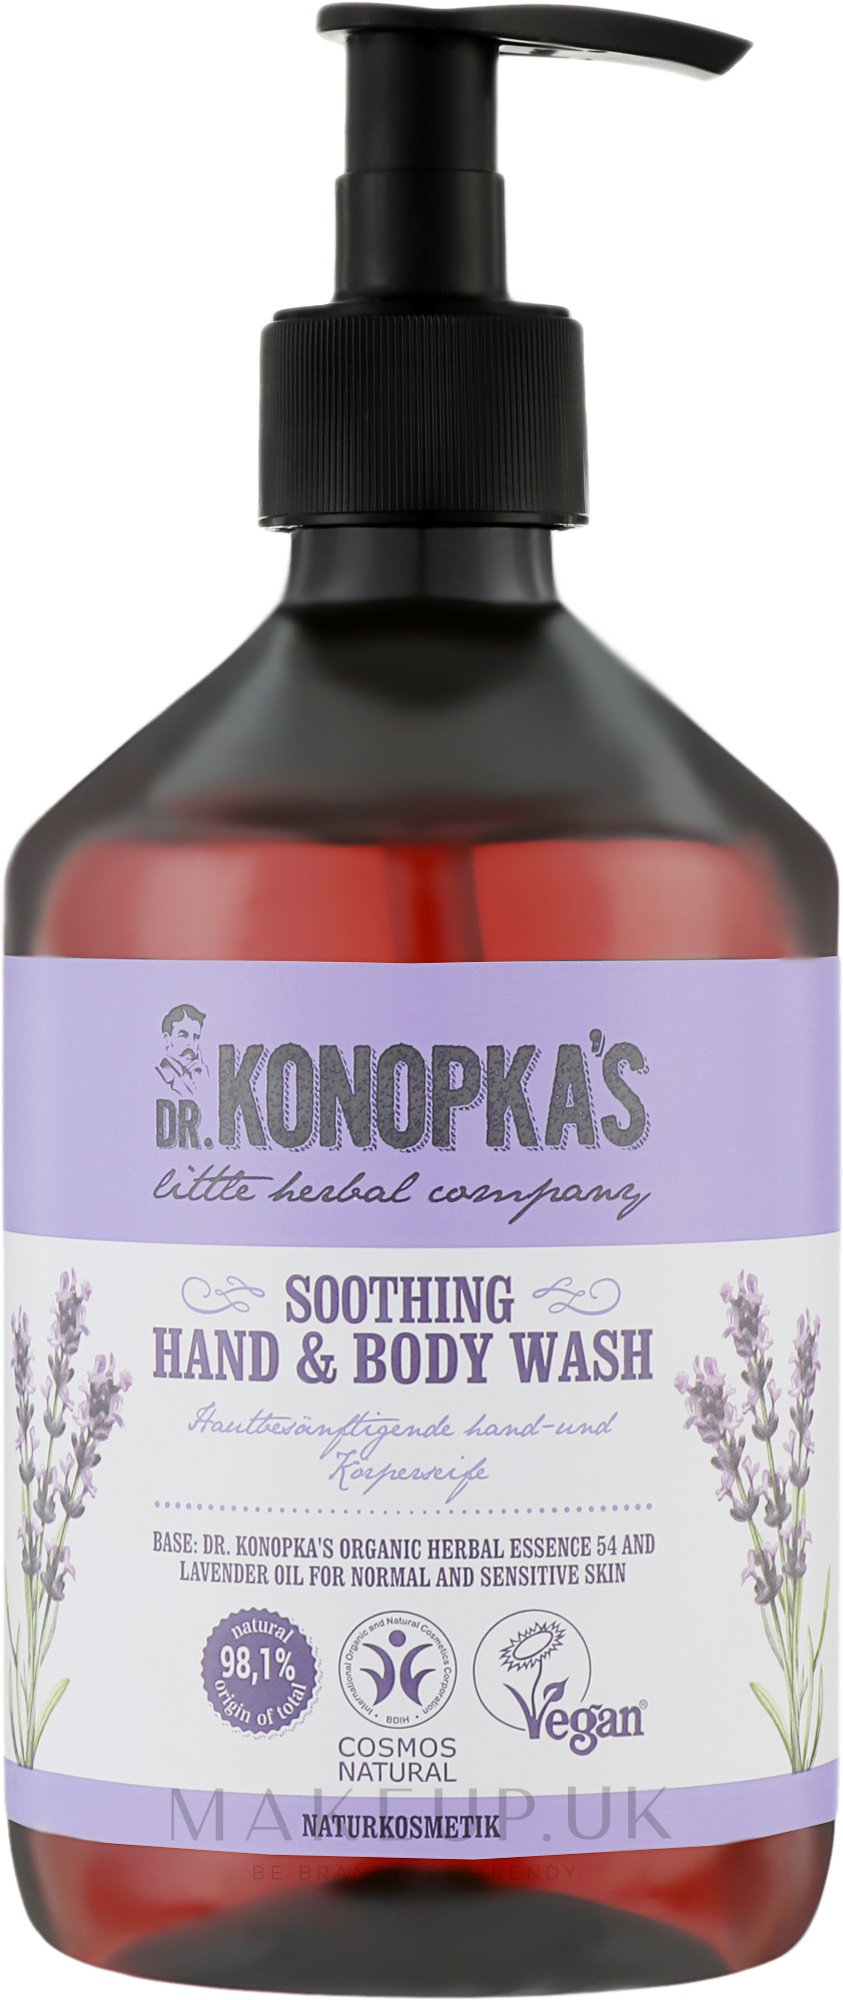 Dr. KONOPKA'S Soothing Hand & Body Wash